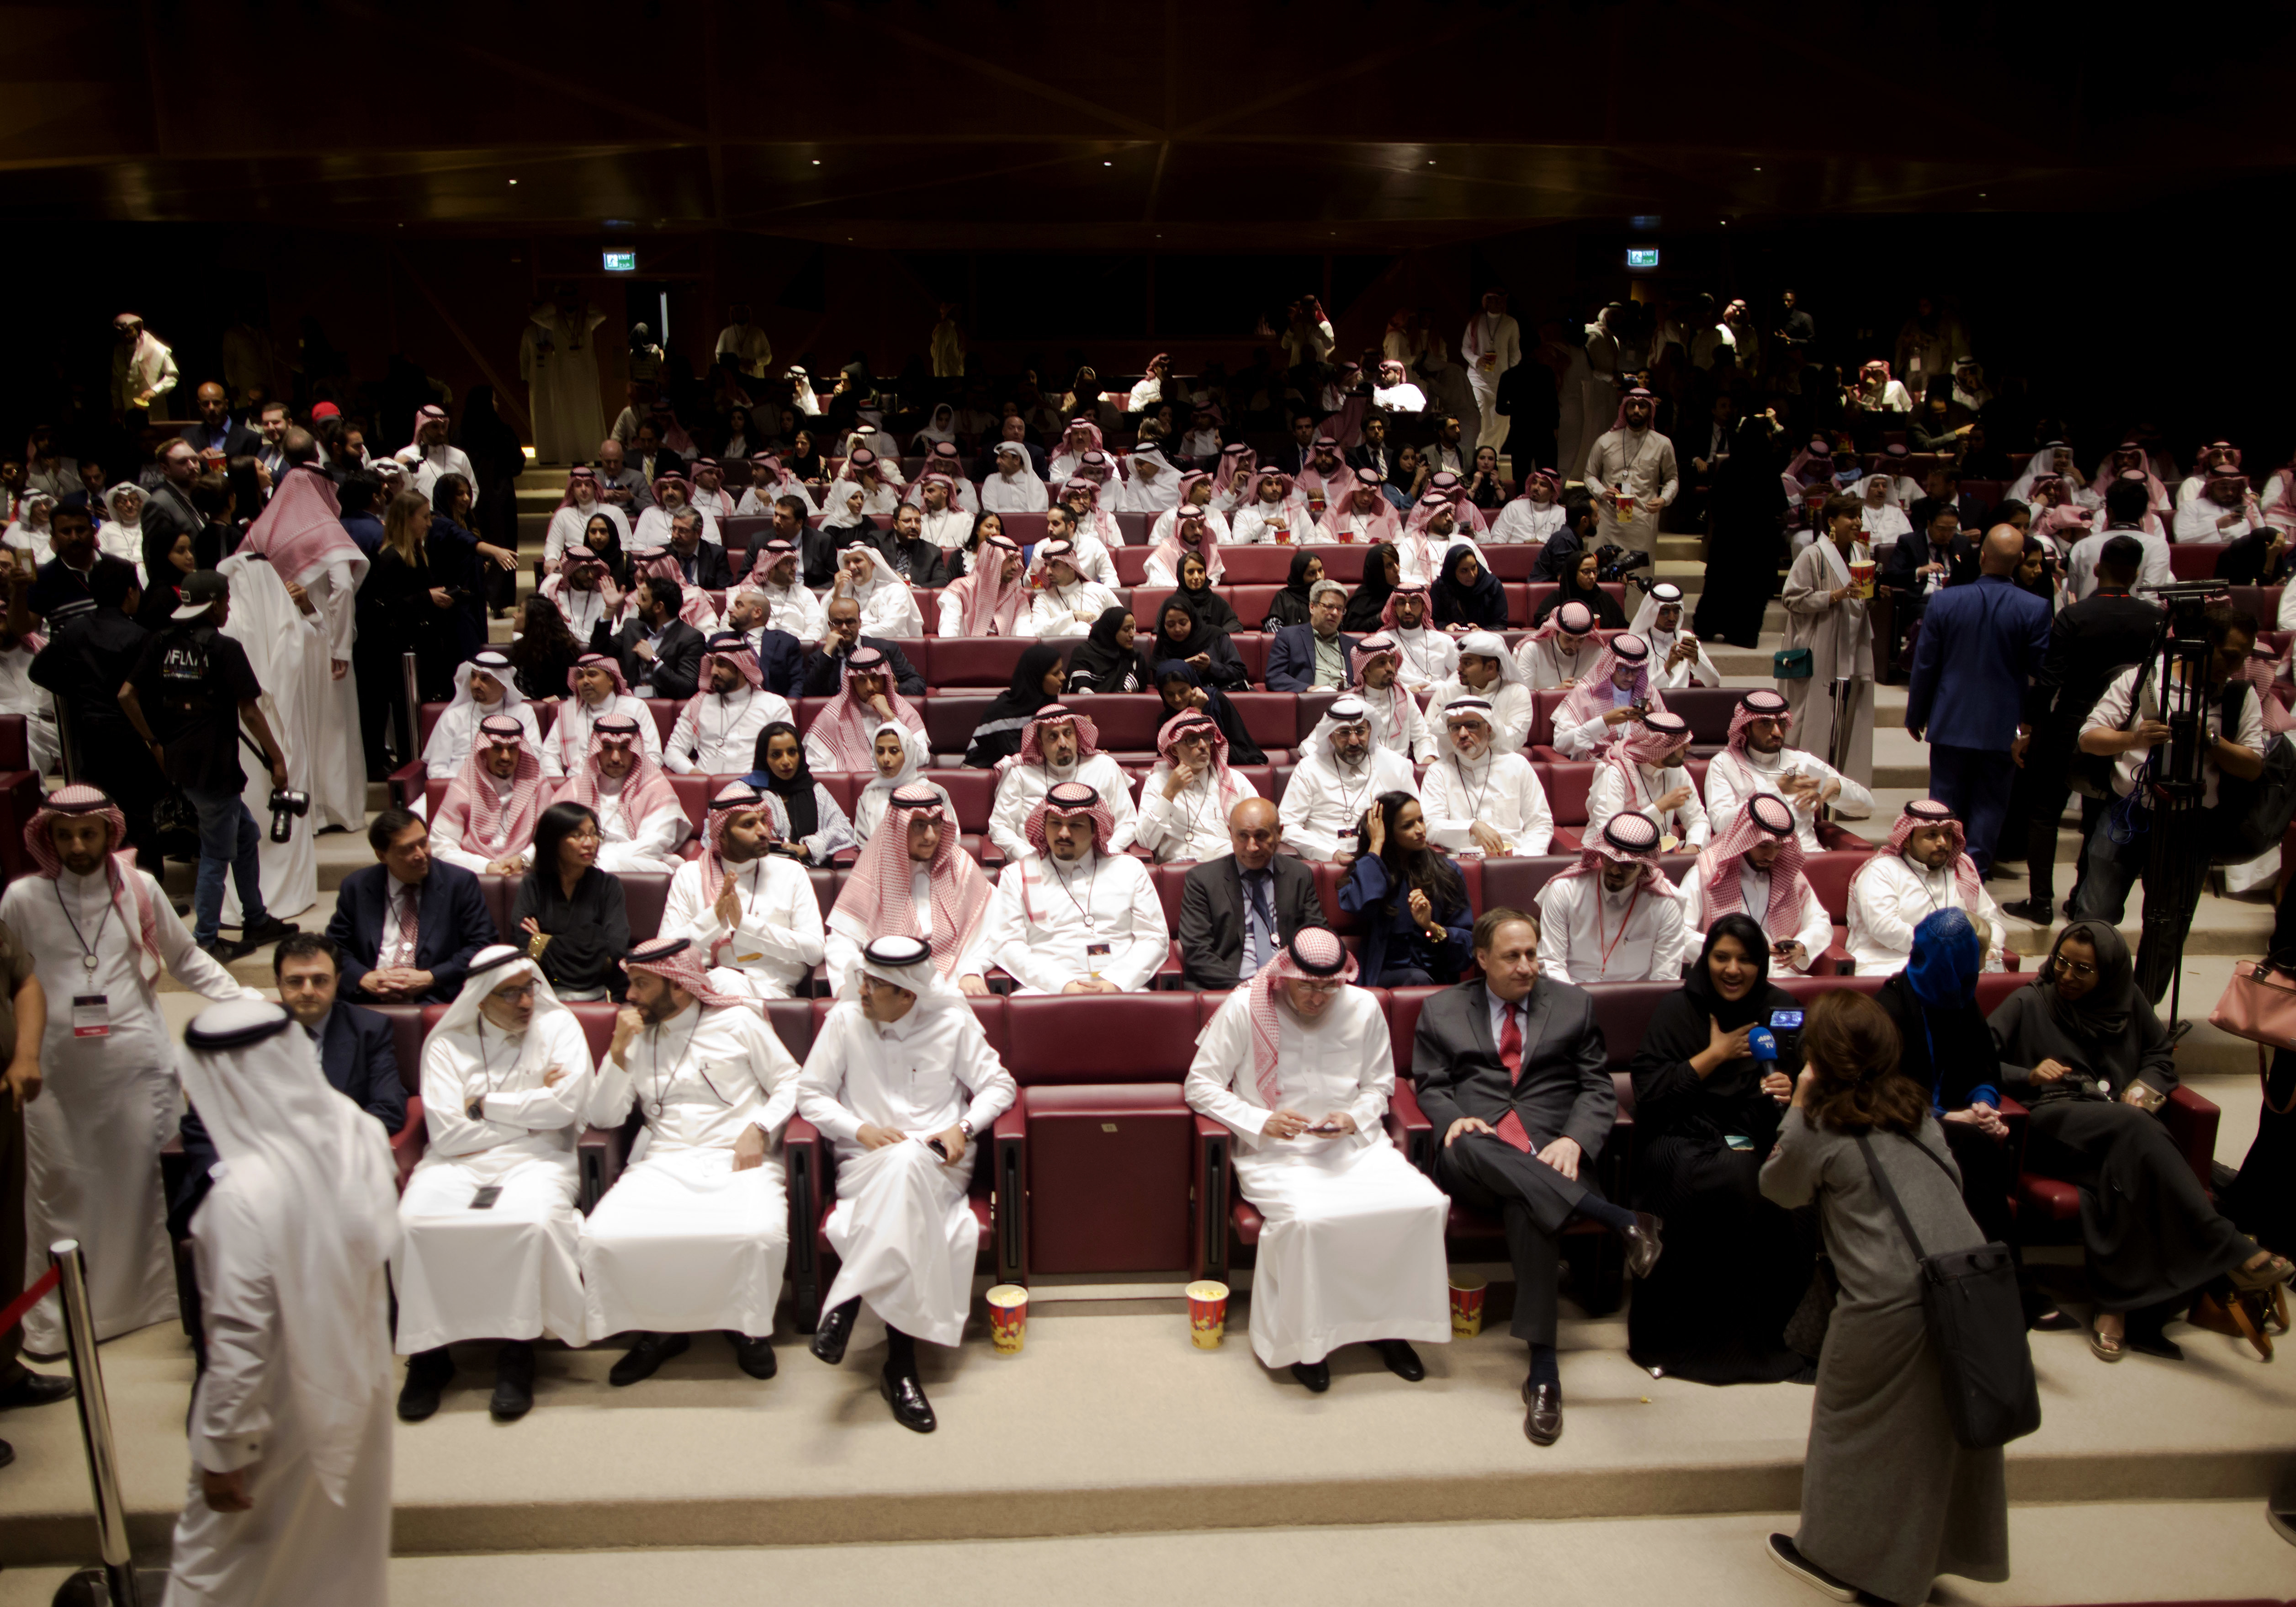 Visitors attend a cinema theatre during an invitation-only screening, at the King Abdullah Financial District Theater, in Riyadh, Saudi Arabia, Wednesday, April 18, 2018. Saudi Arabia held a private screening of the Hollywood blockbuster 